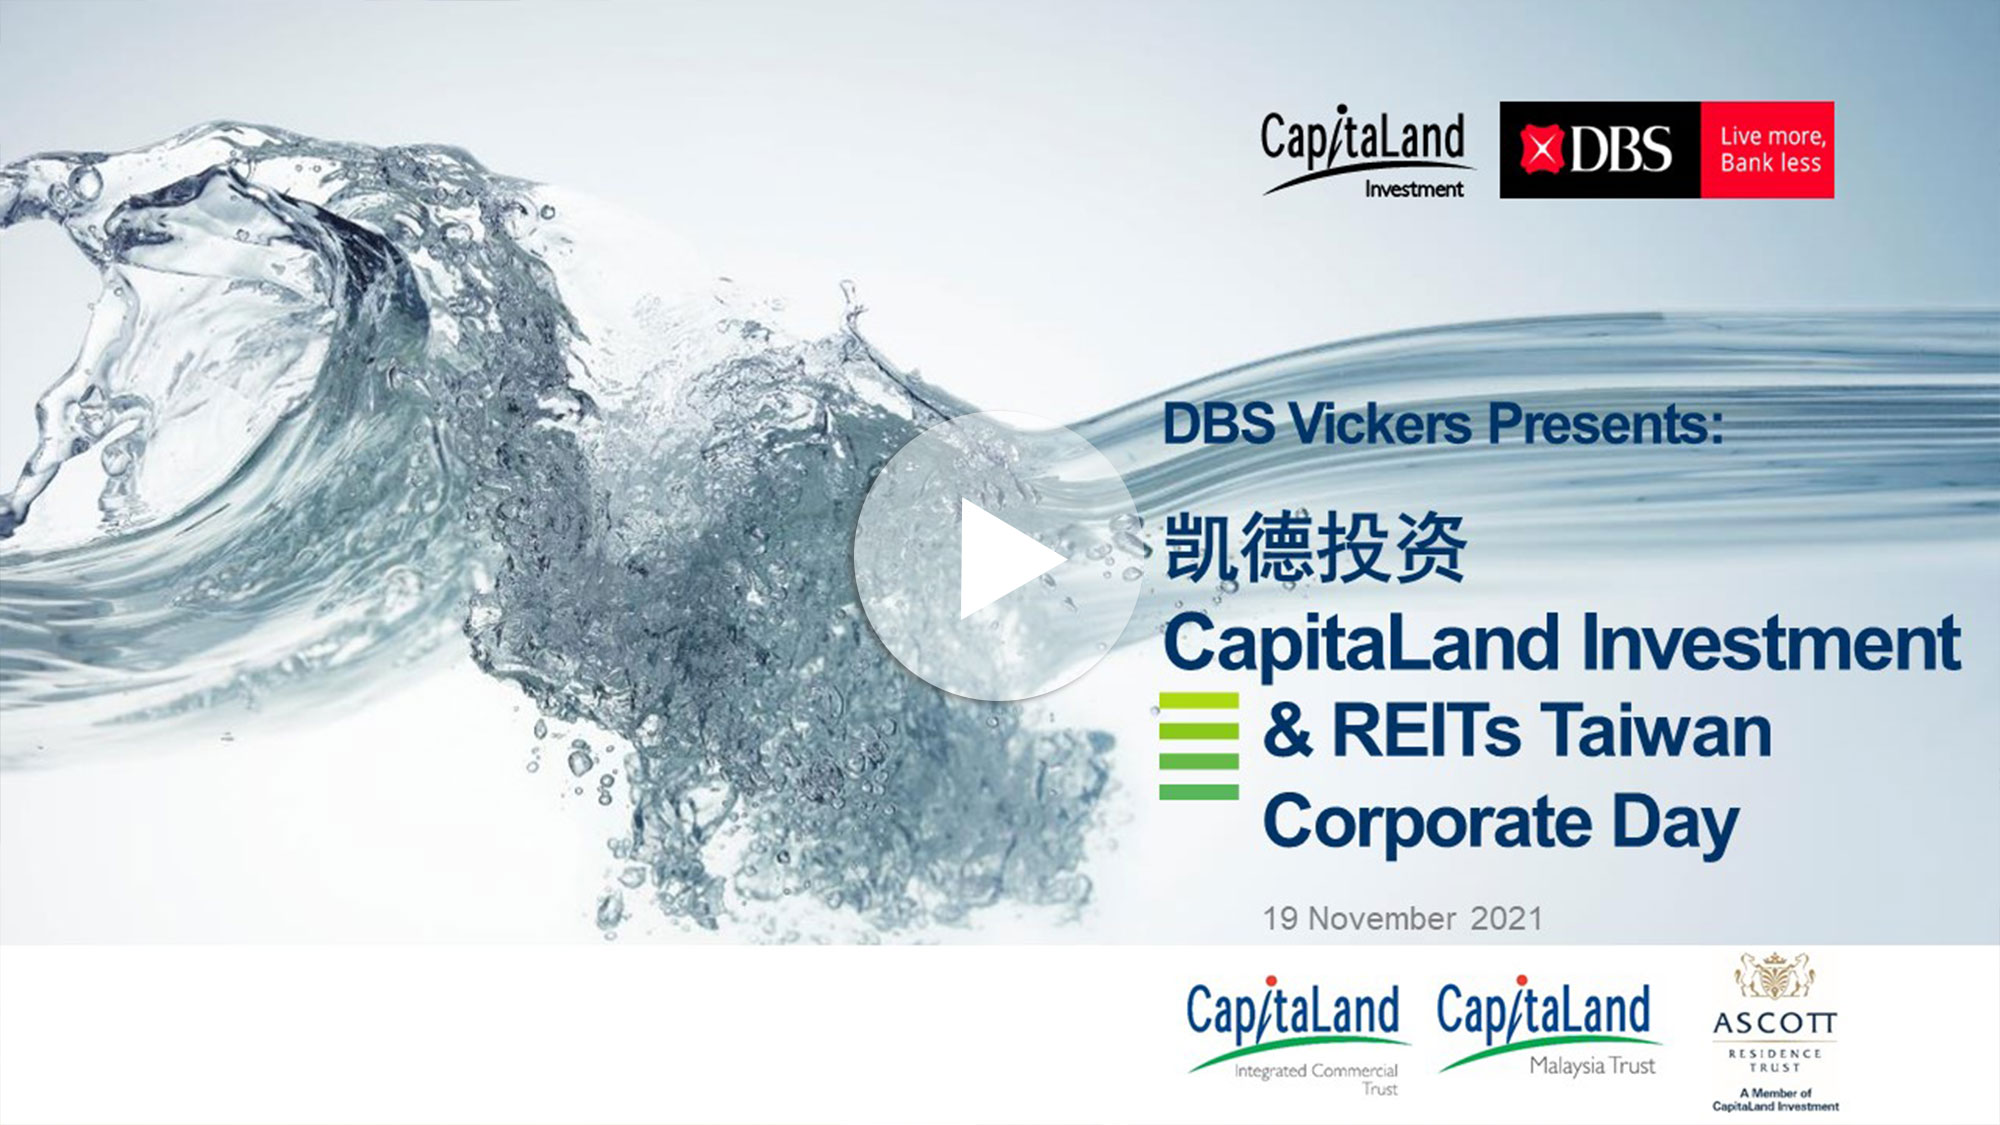 CapitaLand Investment & REITs Taiwan Corporate Day - Session 3